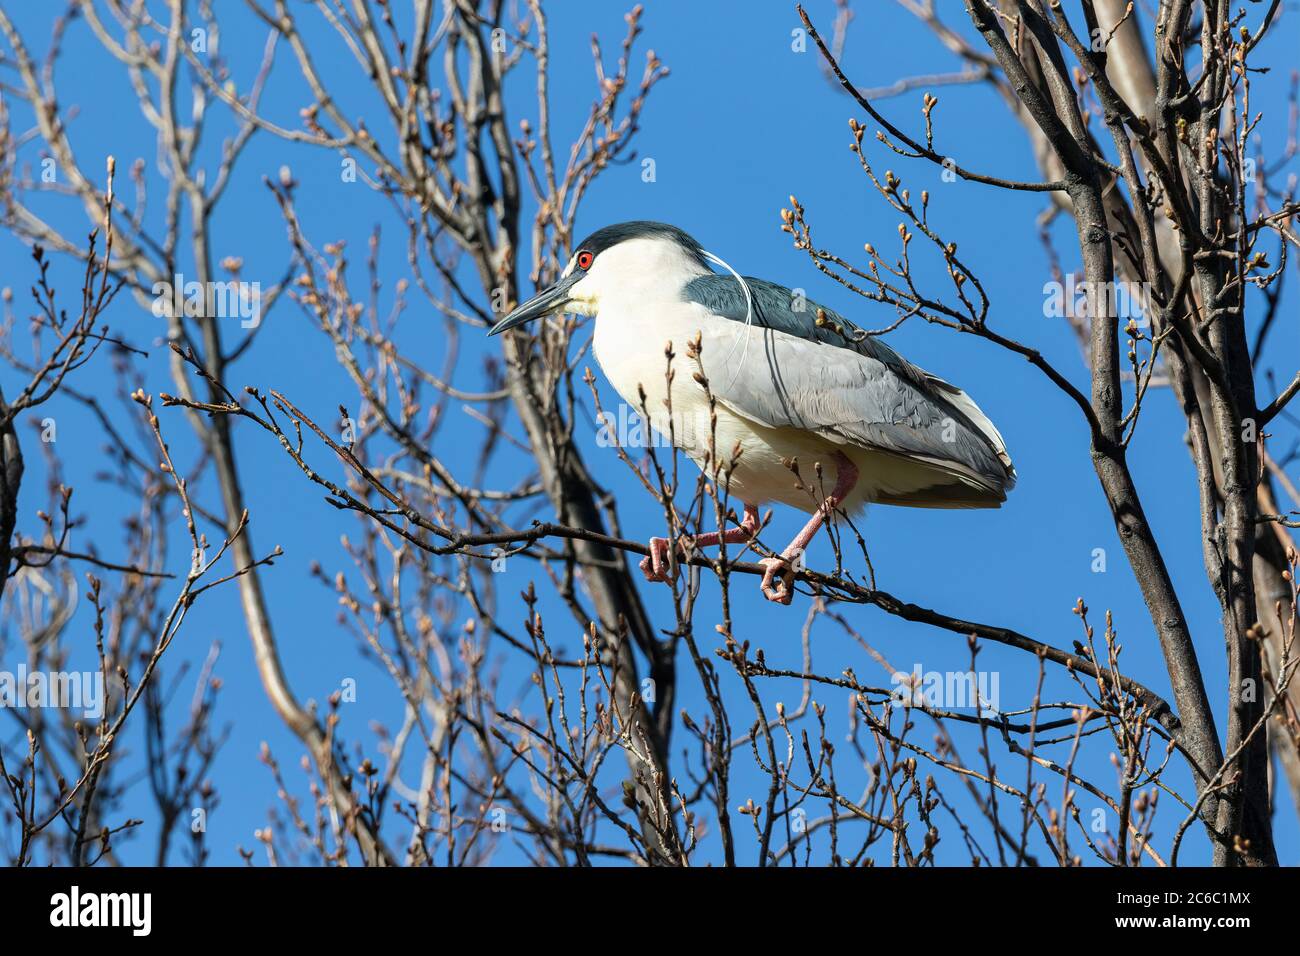 A Black-crowned Night Heron with long white head plumes is perched atop a budding tree on a bright and Sunny Spring Day. Stock Photo